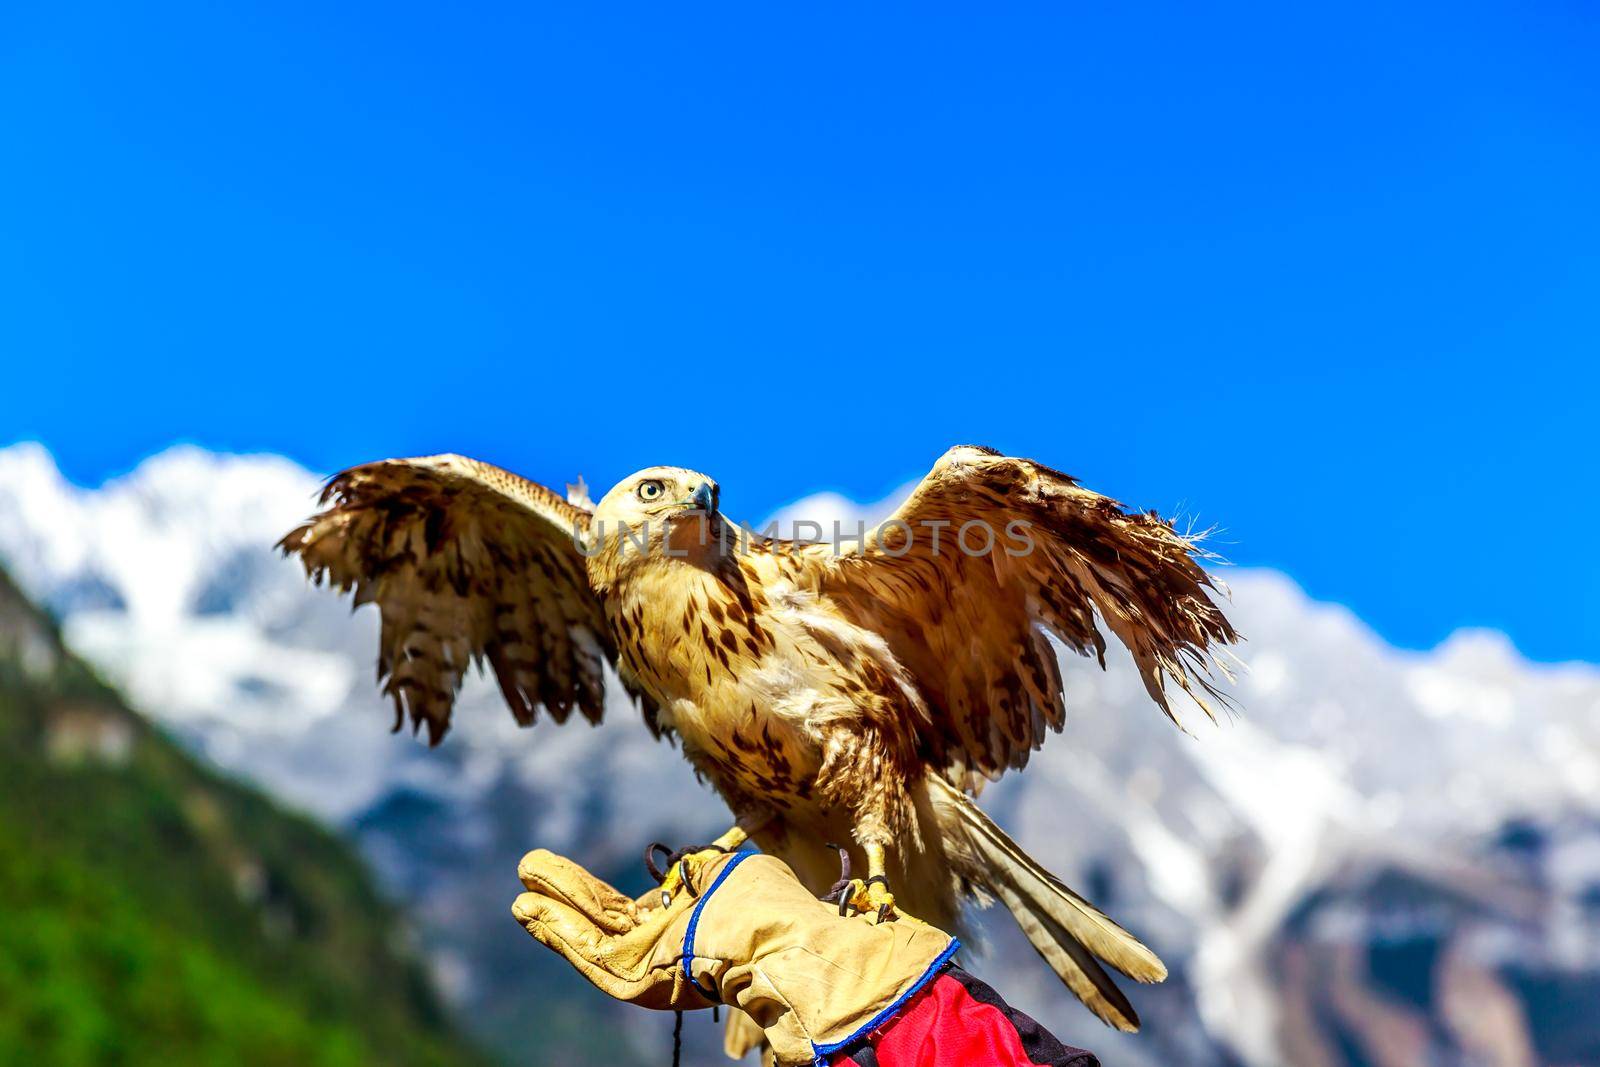 Trained falcon at Jade Dragon Snow Mountain, spreading out wings